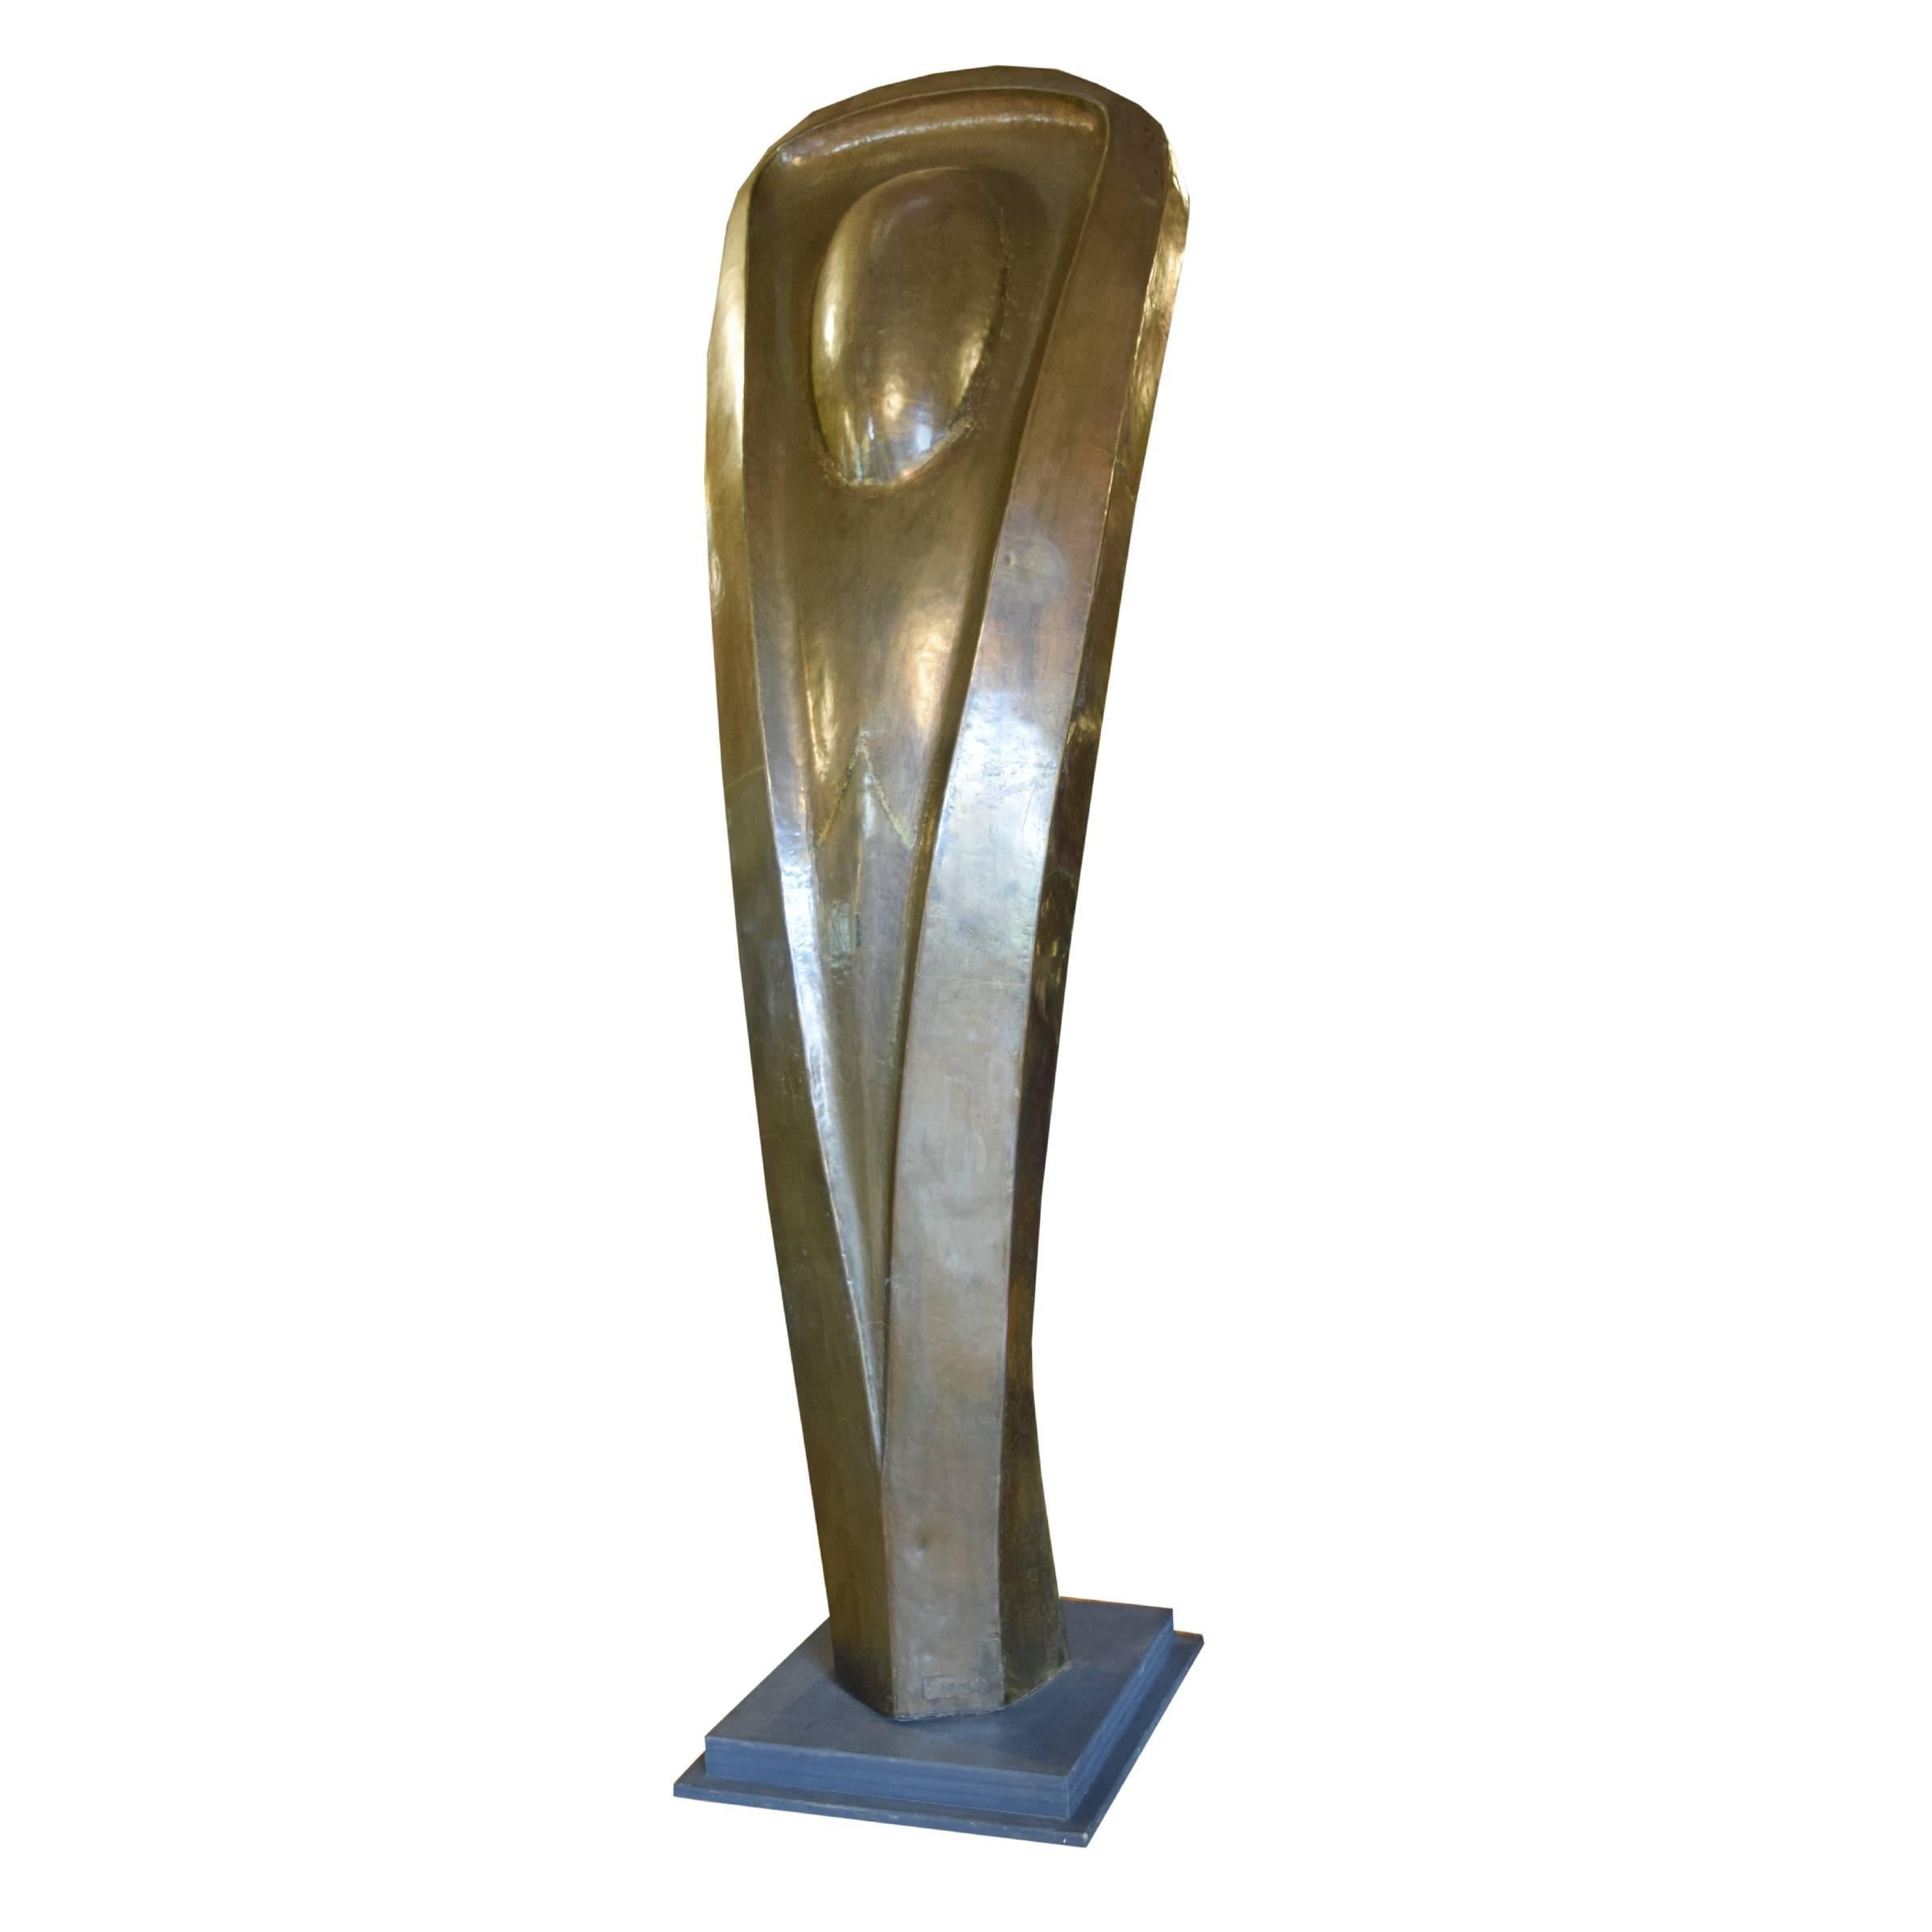 A monumental brass German Mid-Century modernist abstract sculpture, great for indoors or out.